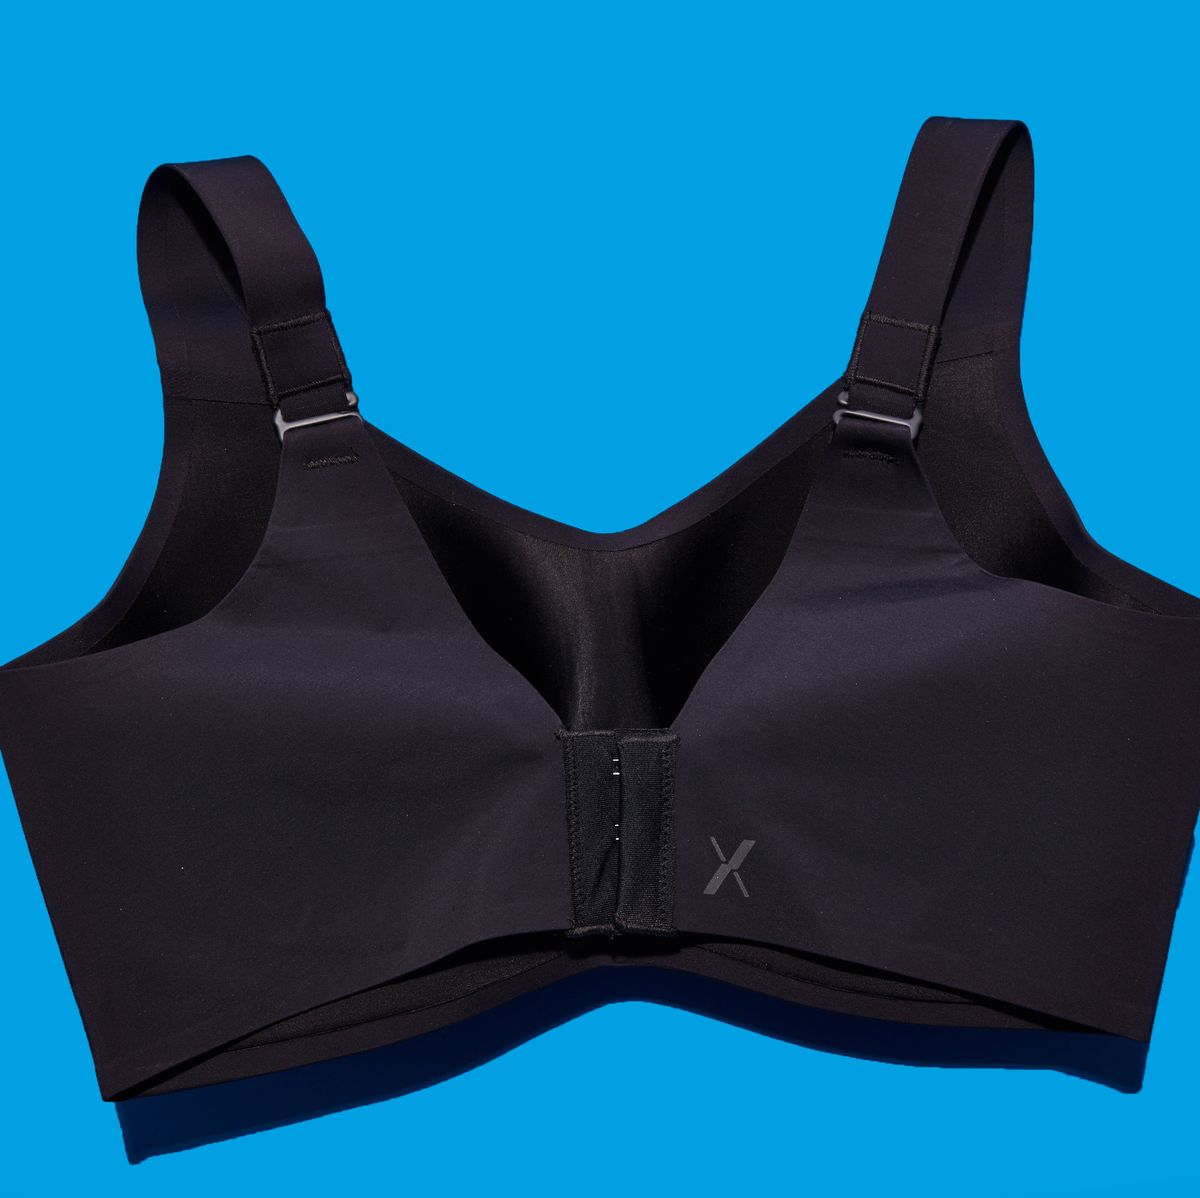 The Best Sports Bra for Runners with C to D Cups is the Brooks